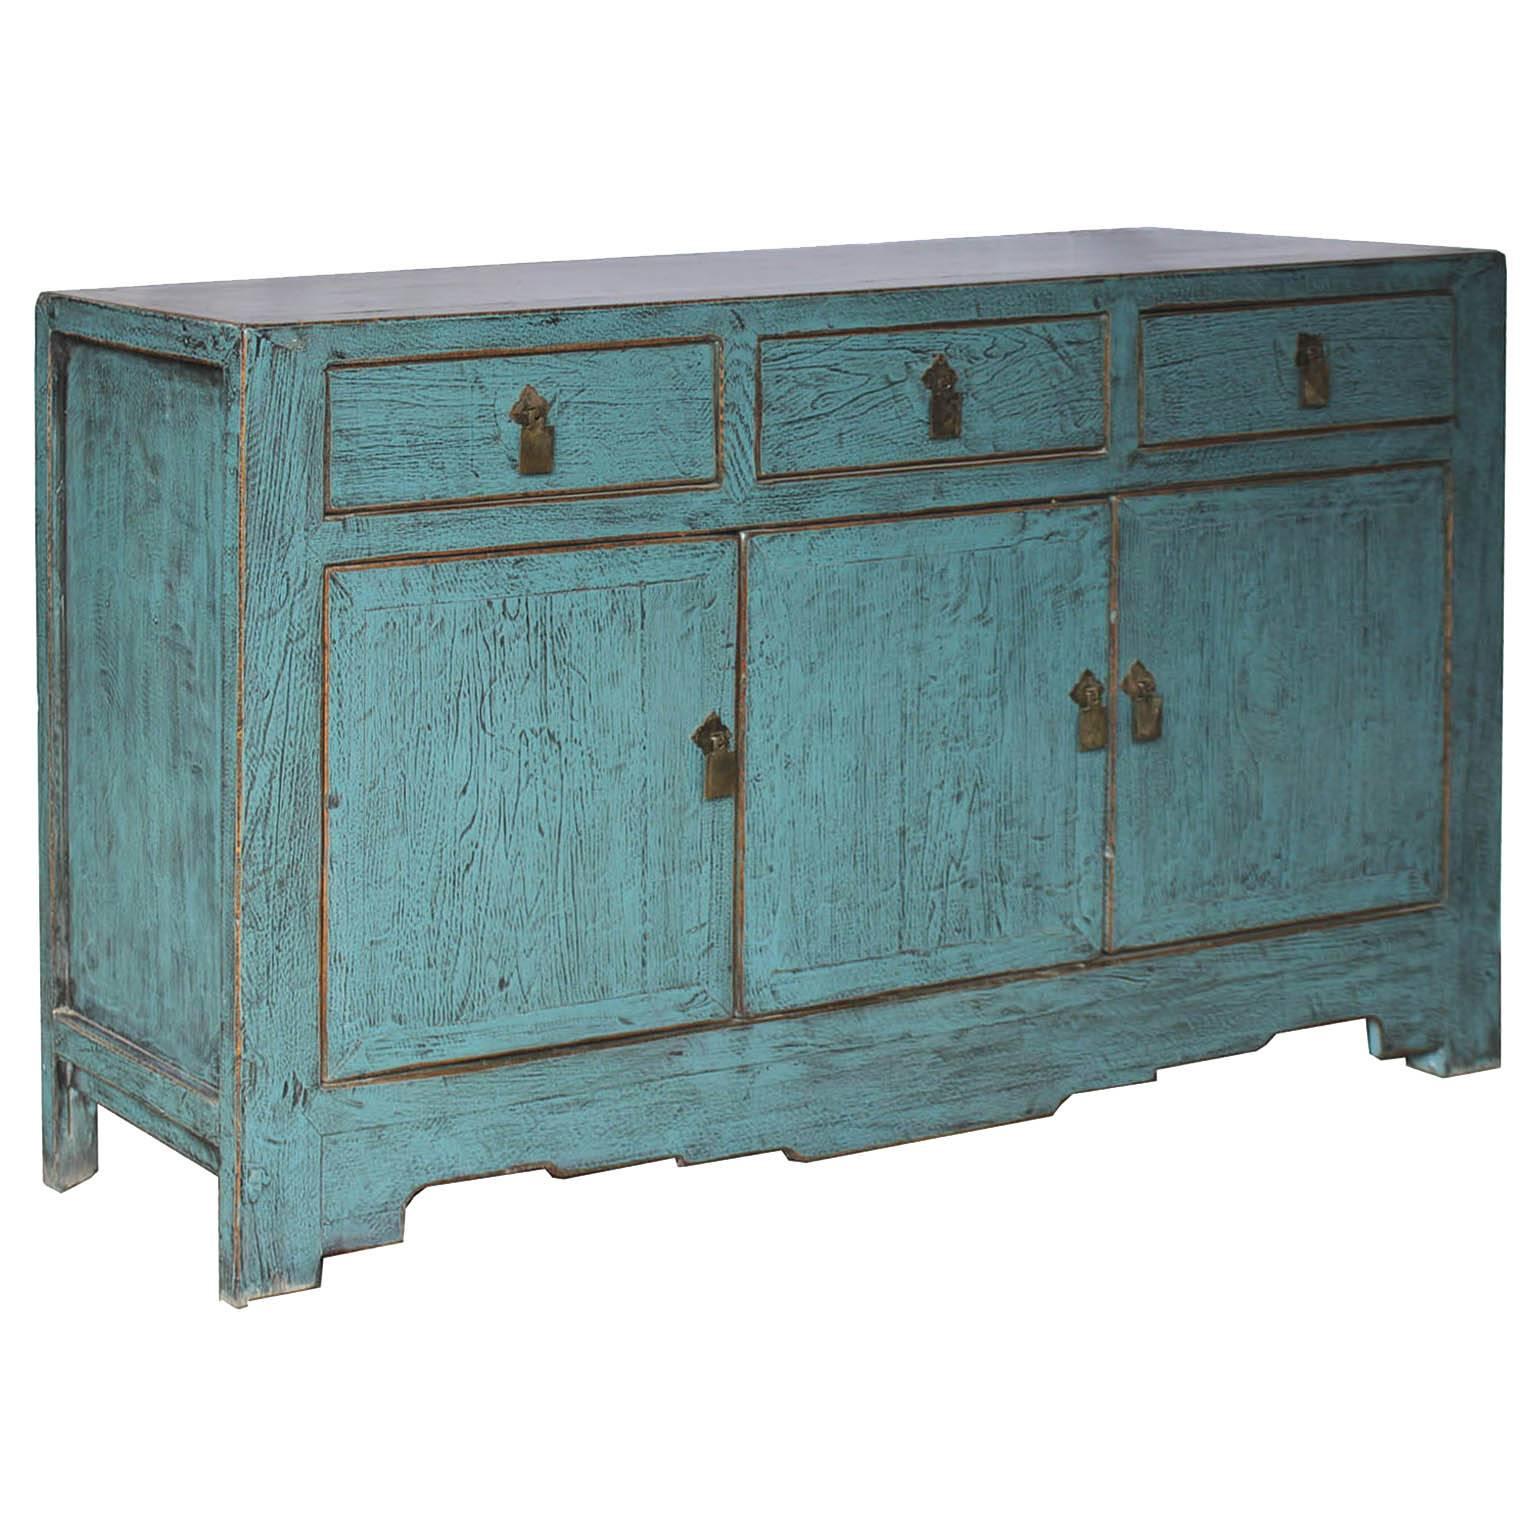 Robin’s egg blue lacquer sideboard with three drawers, exposed wood edges and tiered bottom skirt would be a focal point in a contemporary interior. Tianjin, China, circa 1900s.